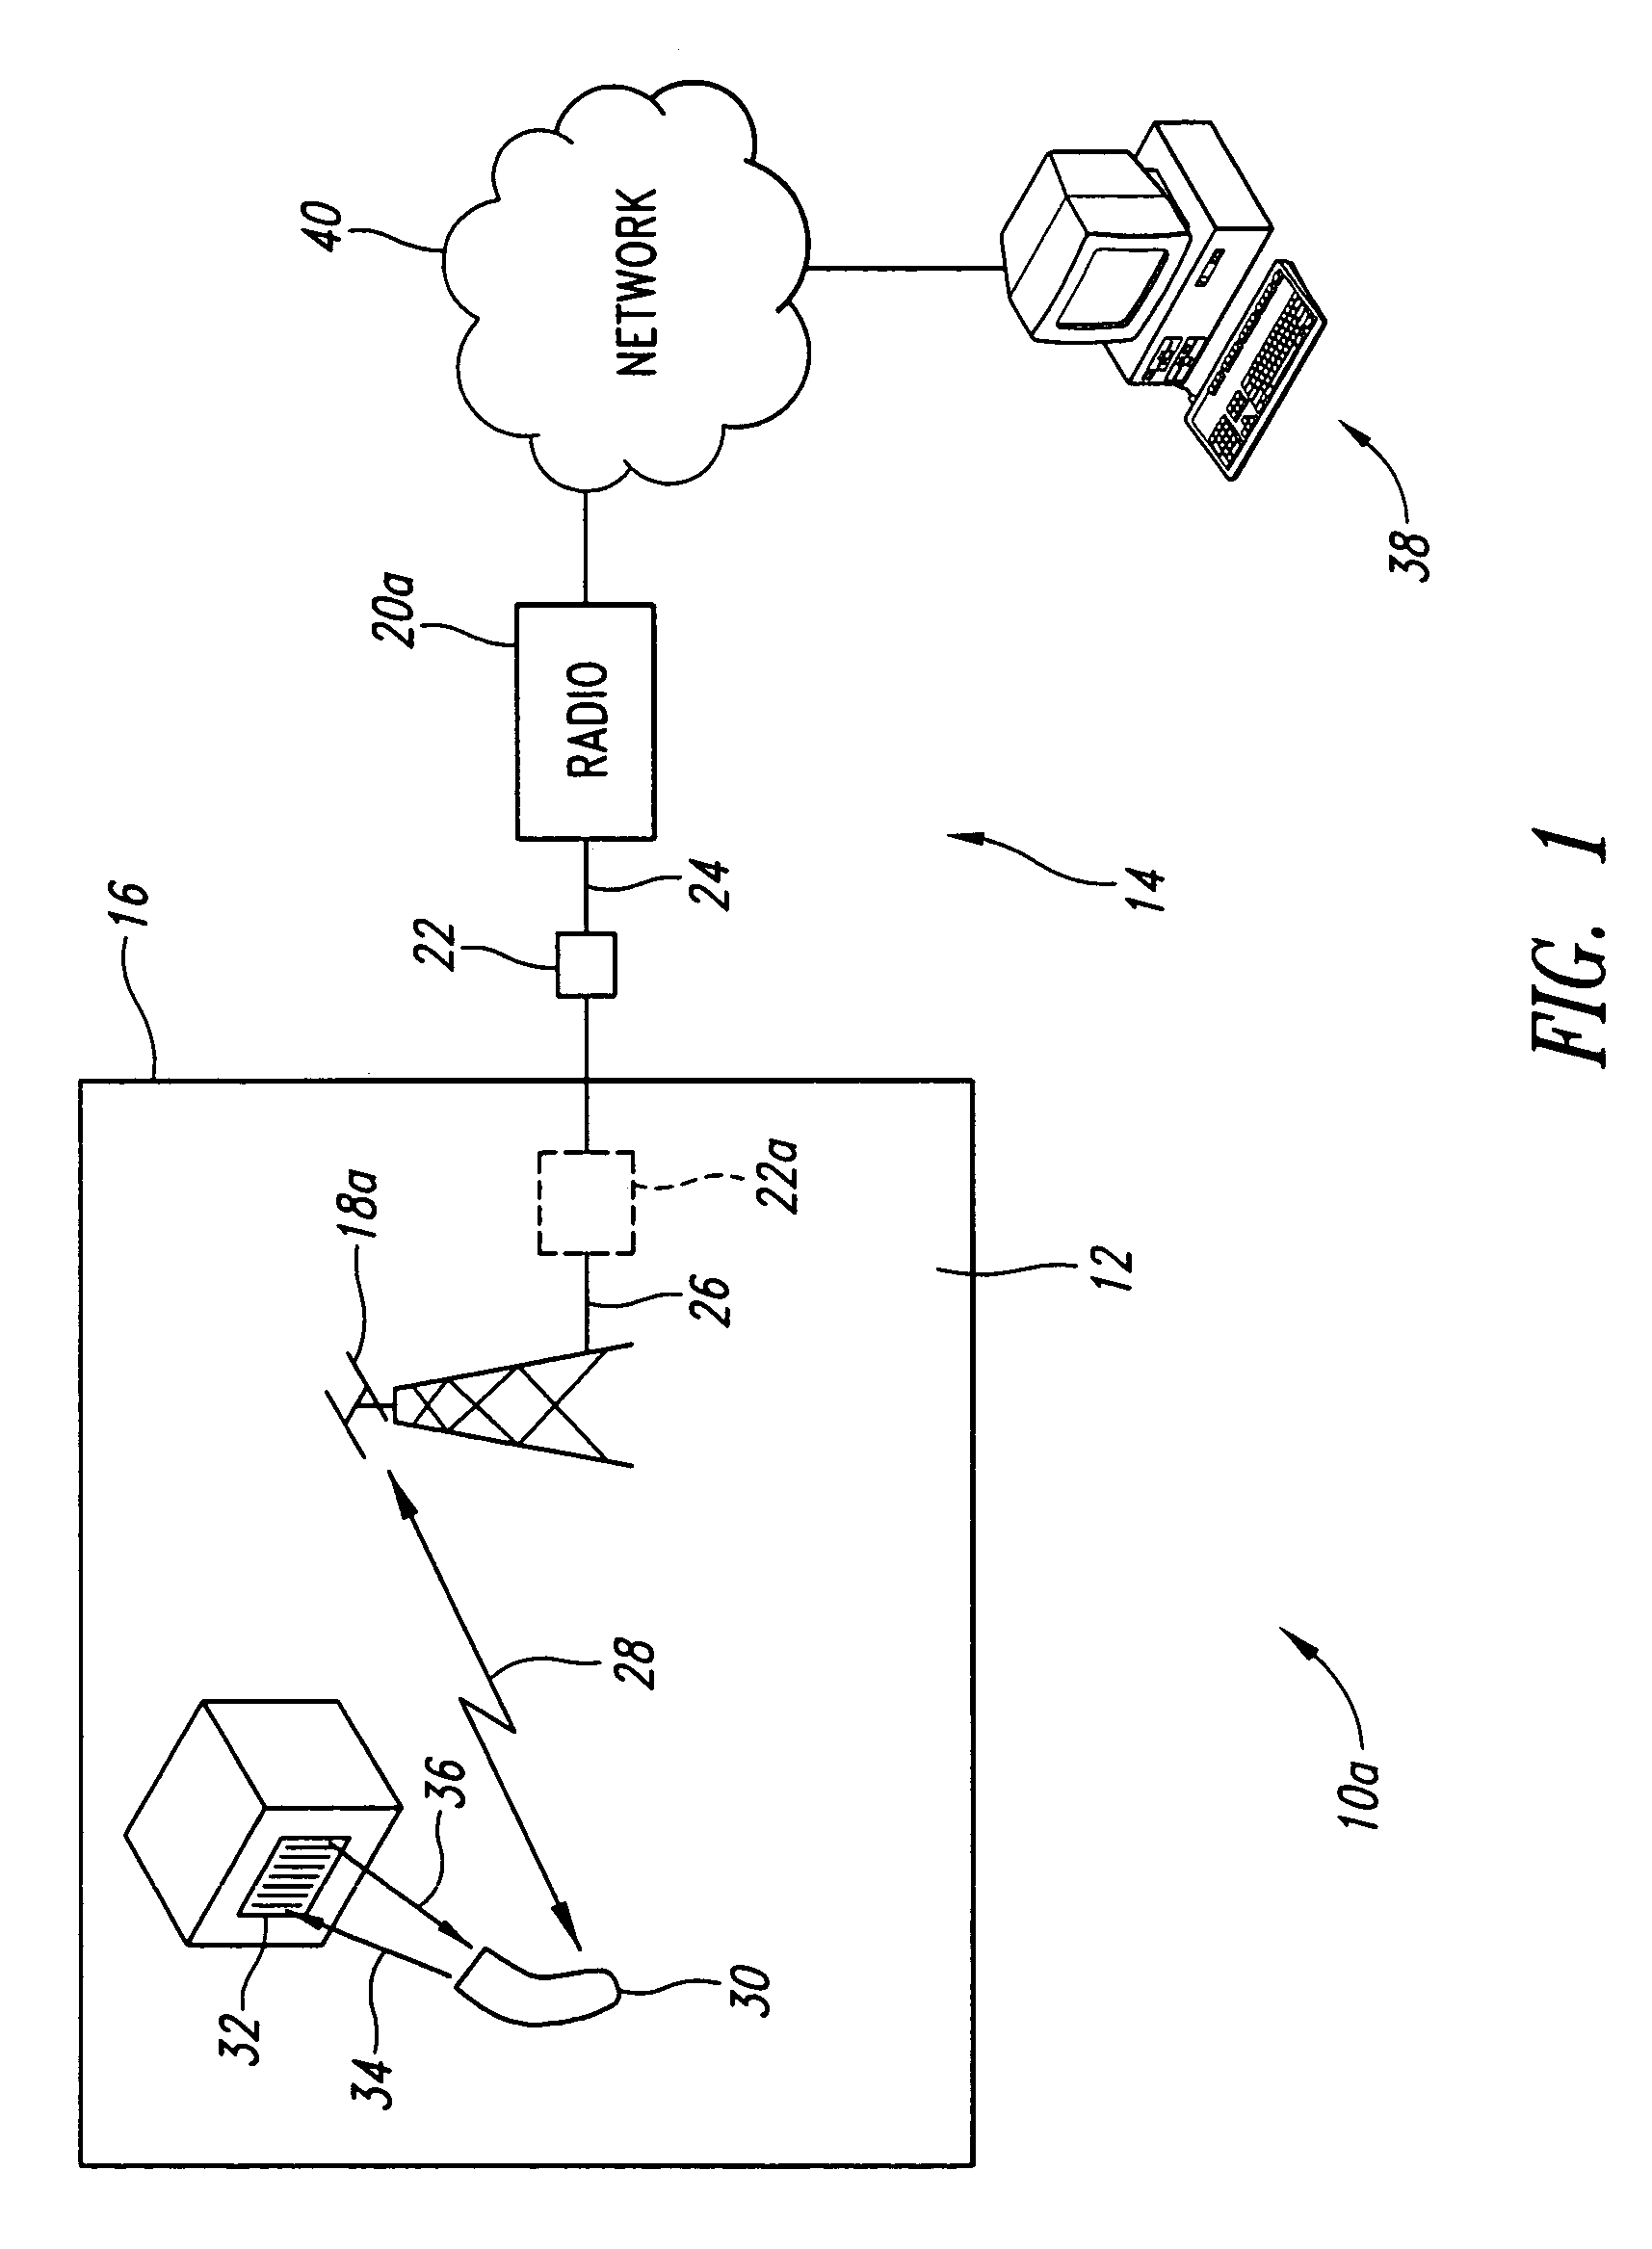 Apparatus and method to facilitate wireless communications of automatic data collection devices in potentially hazardous environments